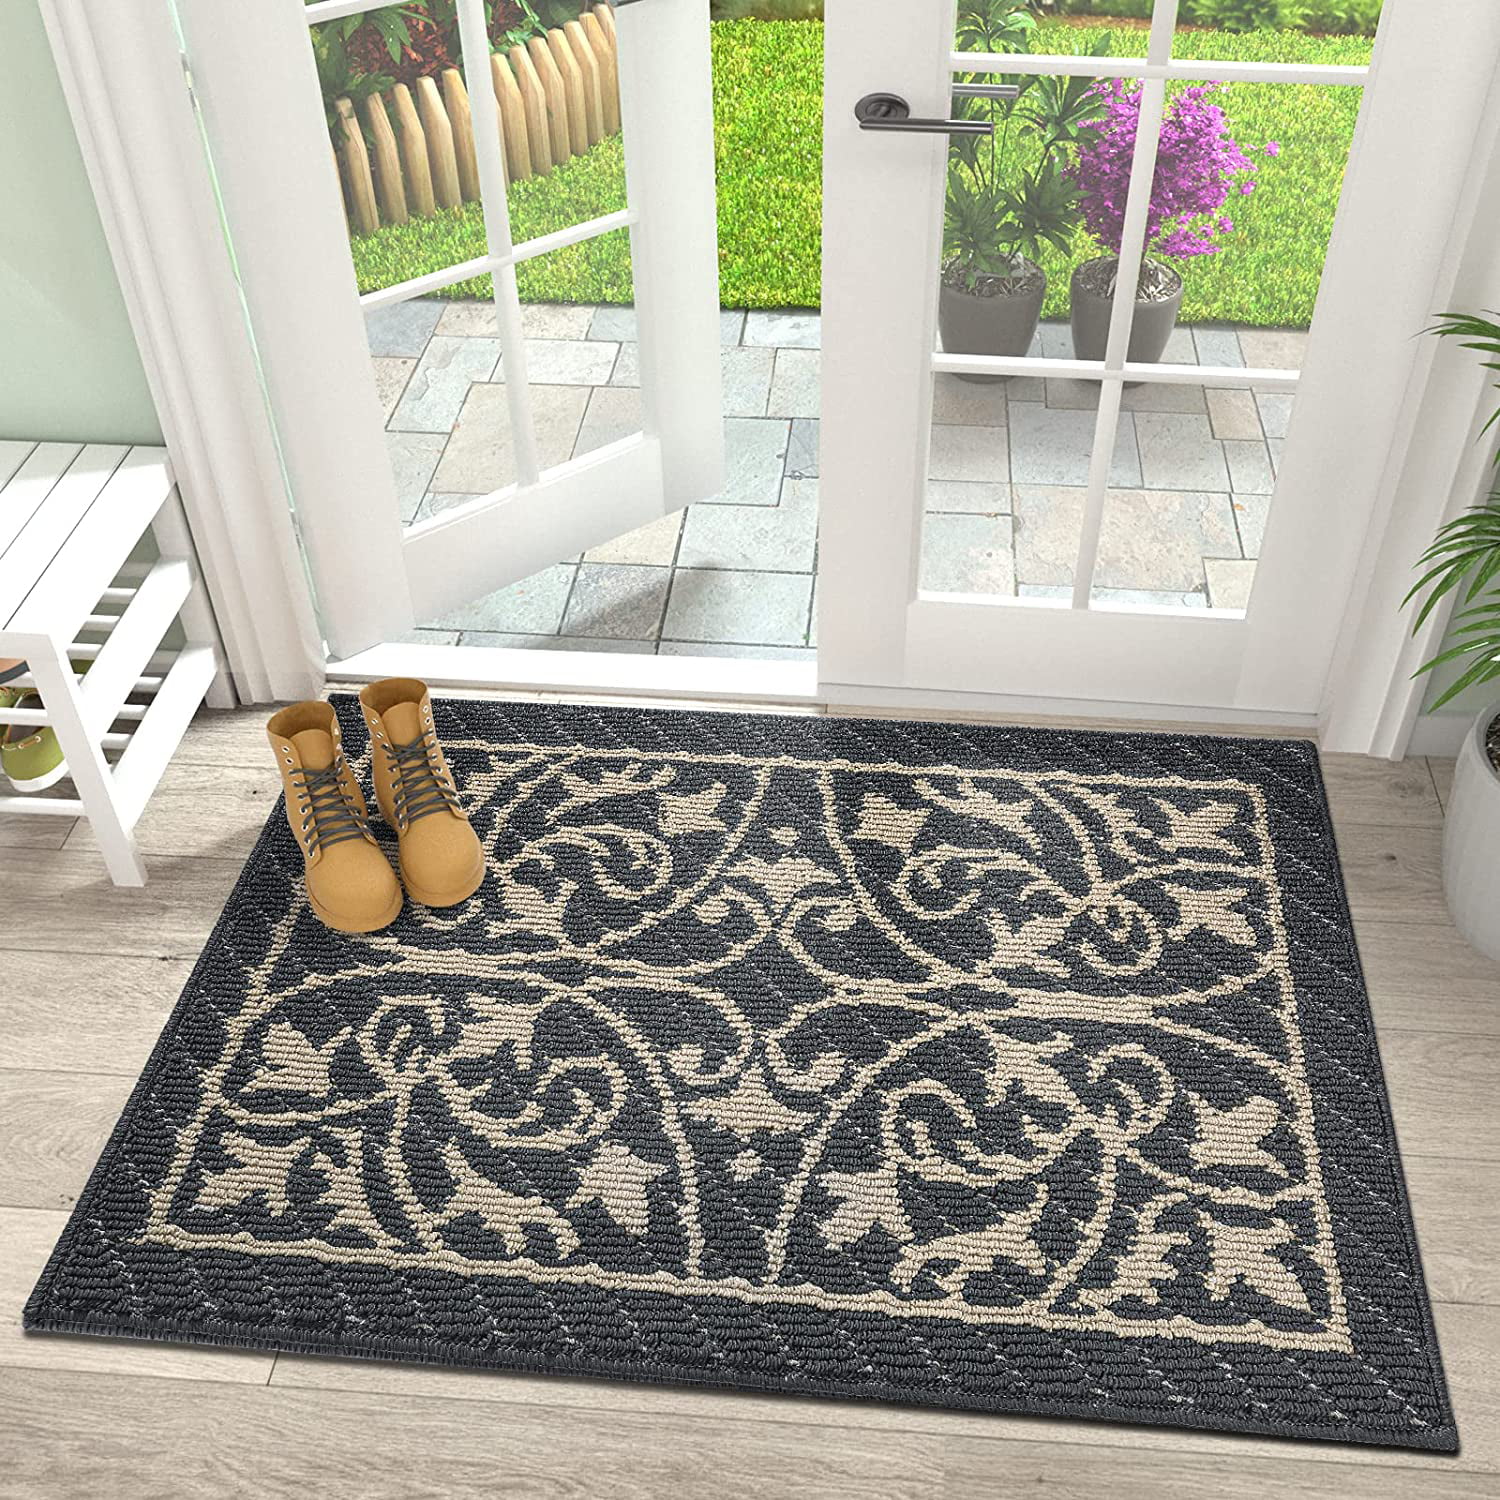 Small Large Heavy Duty Anti Slip Entrance Mat Washable Doormat by Armour Mats 